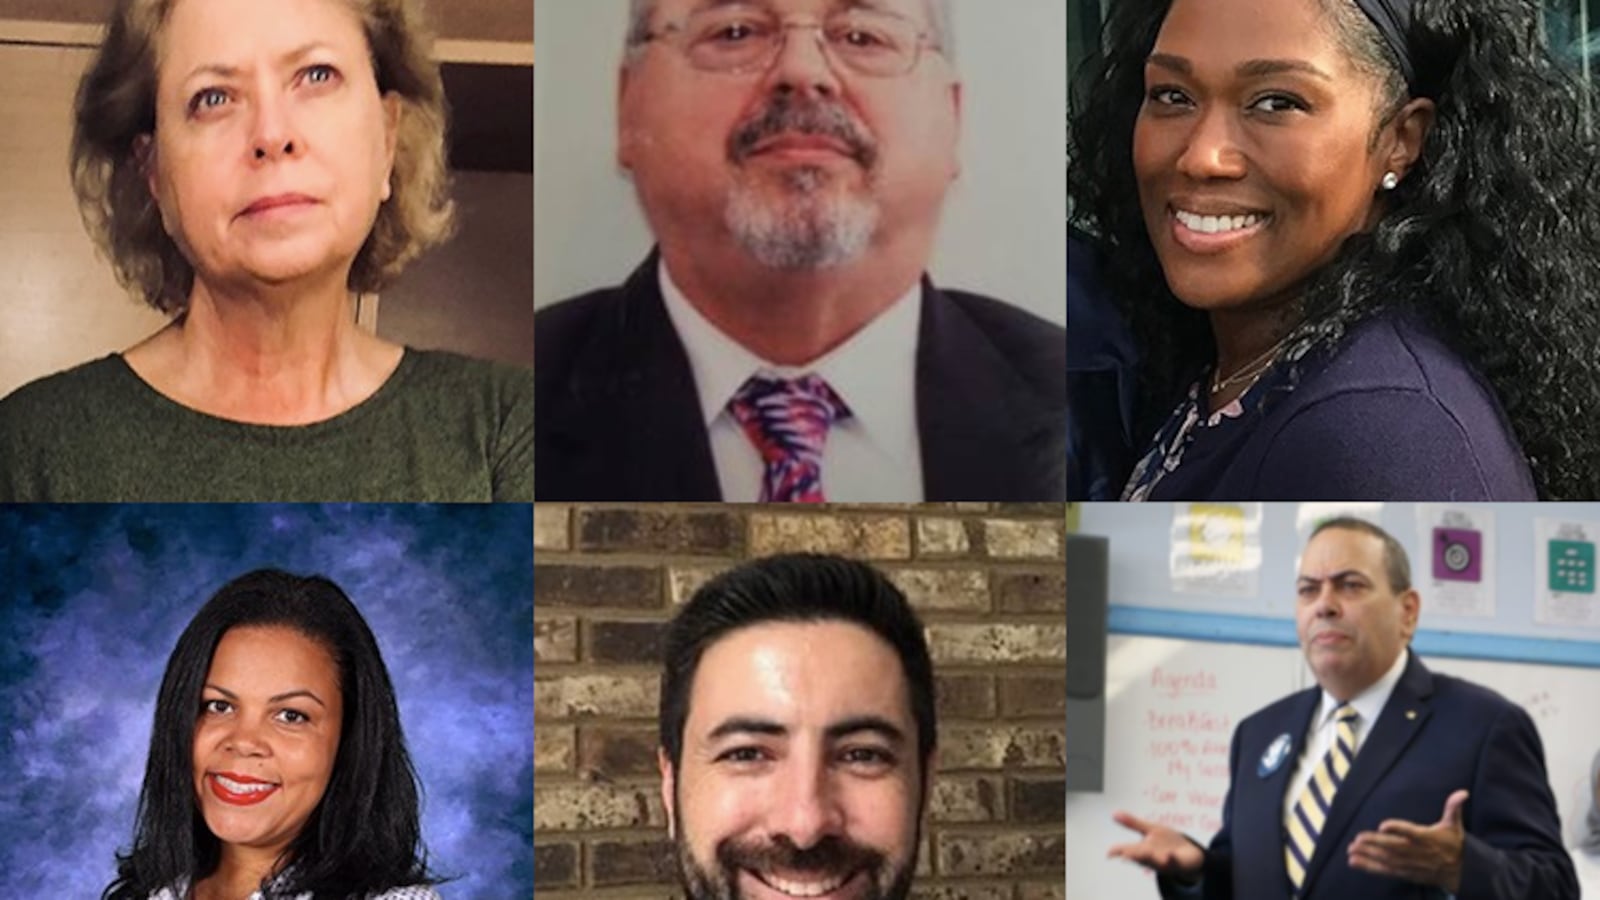 Newark Superintendent Roger León has added several district veterans to his leadership team. Clockwise from top left: Mary Ann Reilly, Steve Morlino, Nicole T. Johnson, León, David Scutari, and Maria Ortiz.